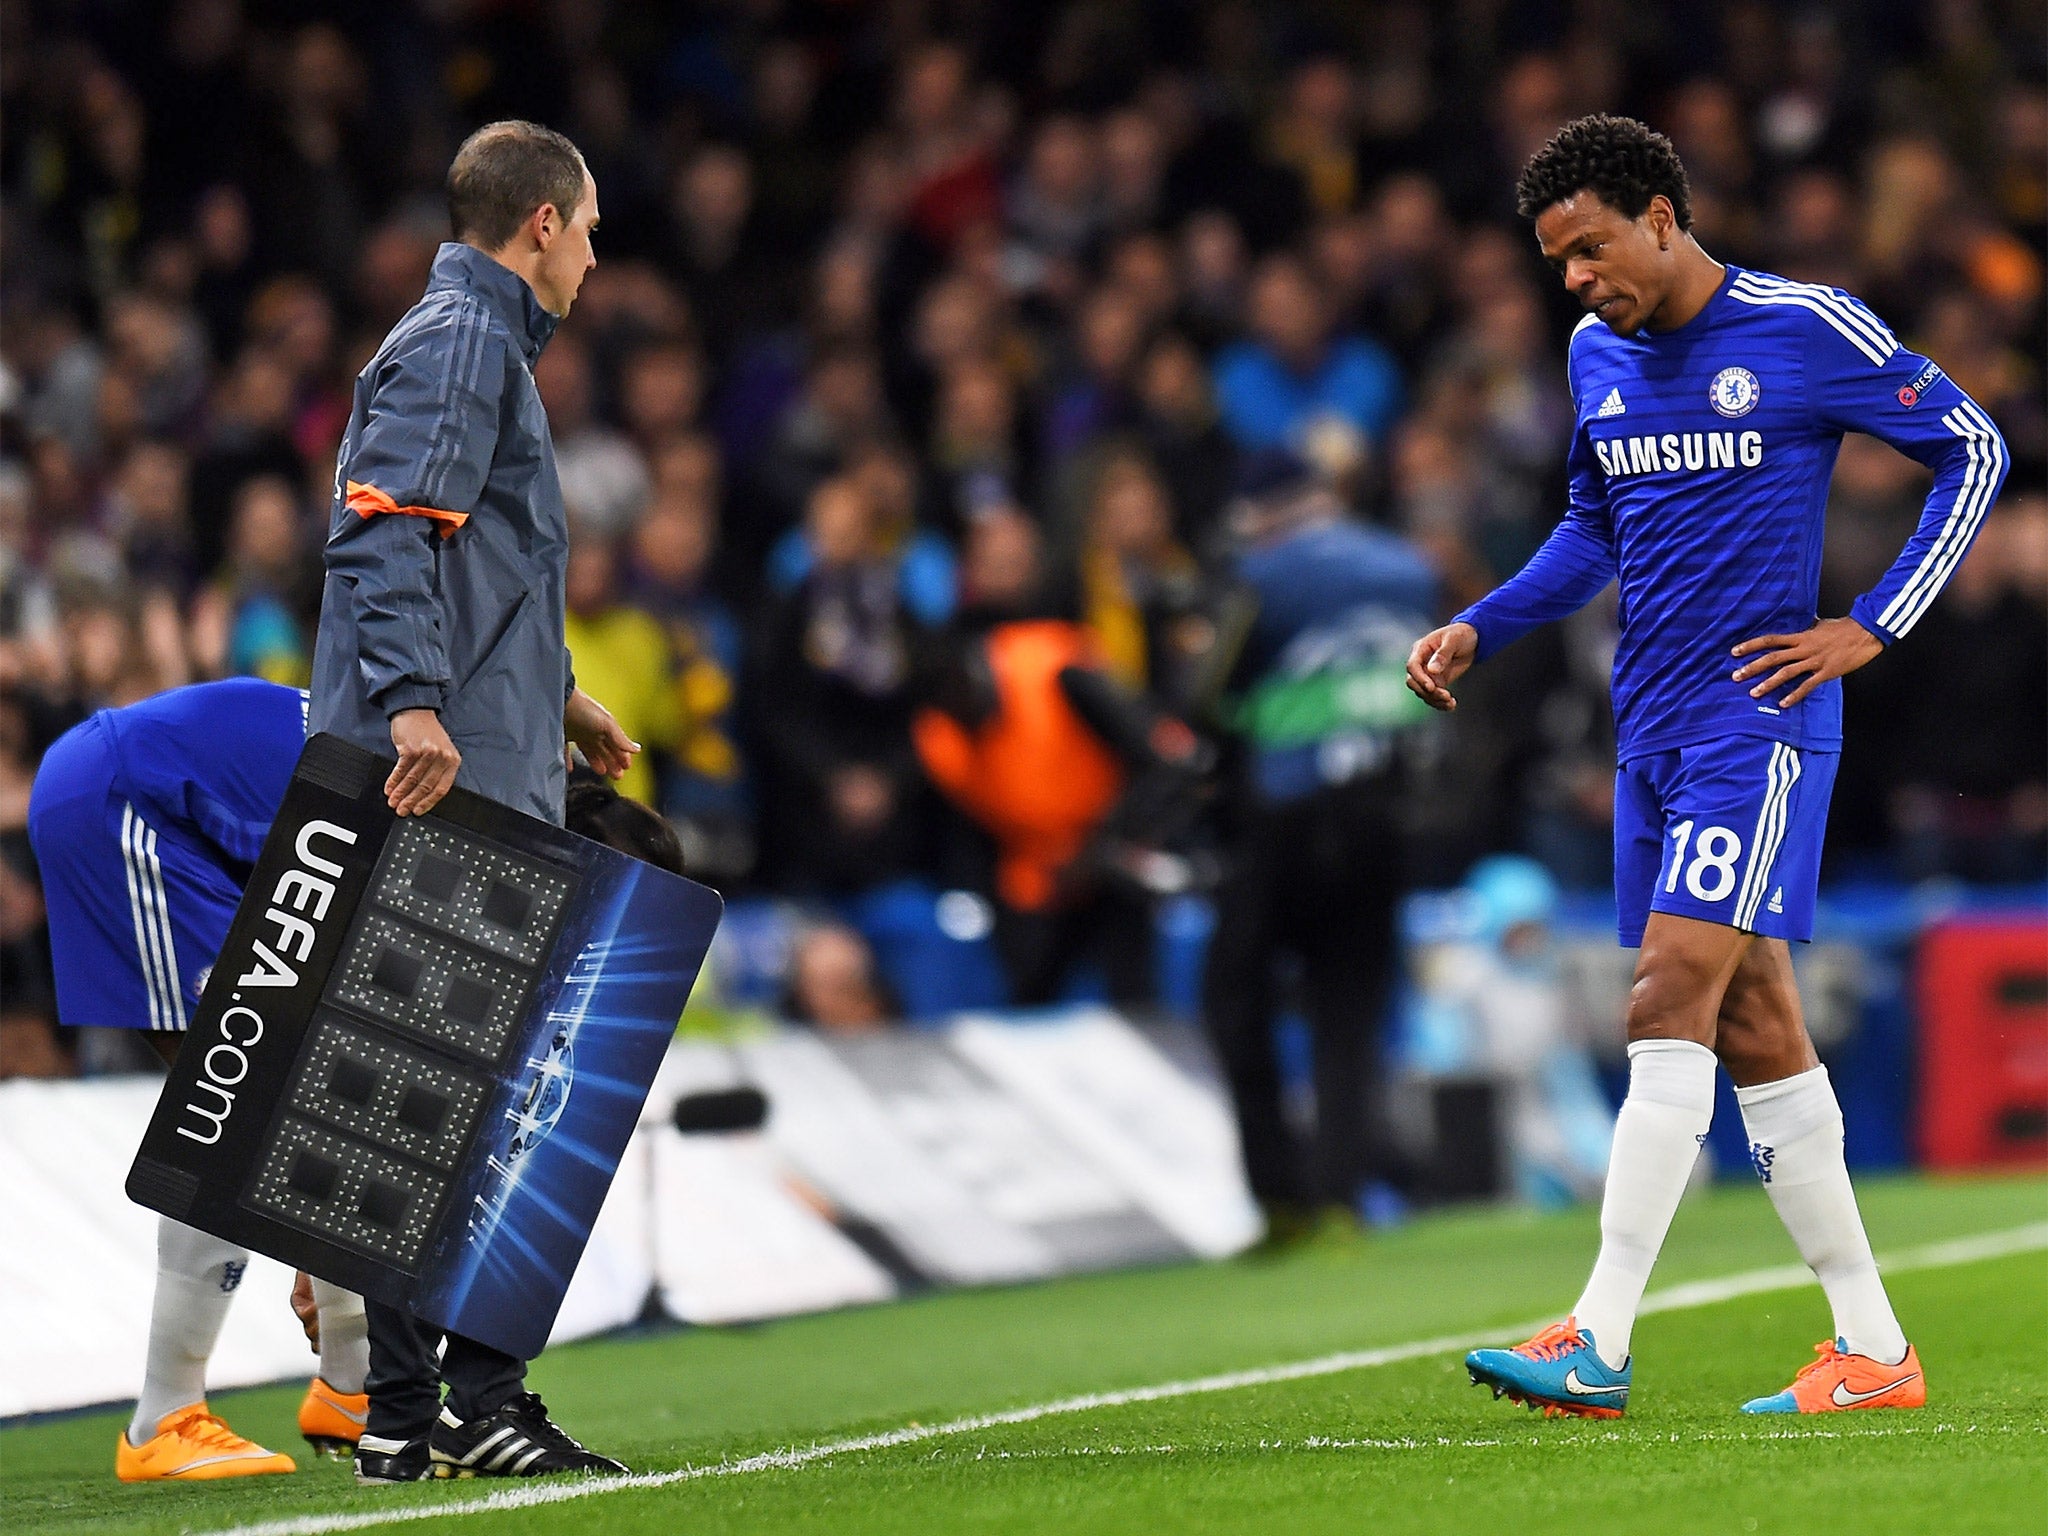 Loic Remy limps off shortly after scoring